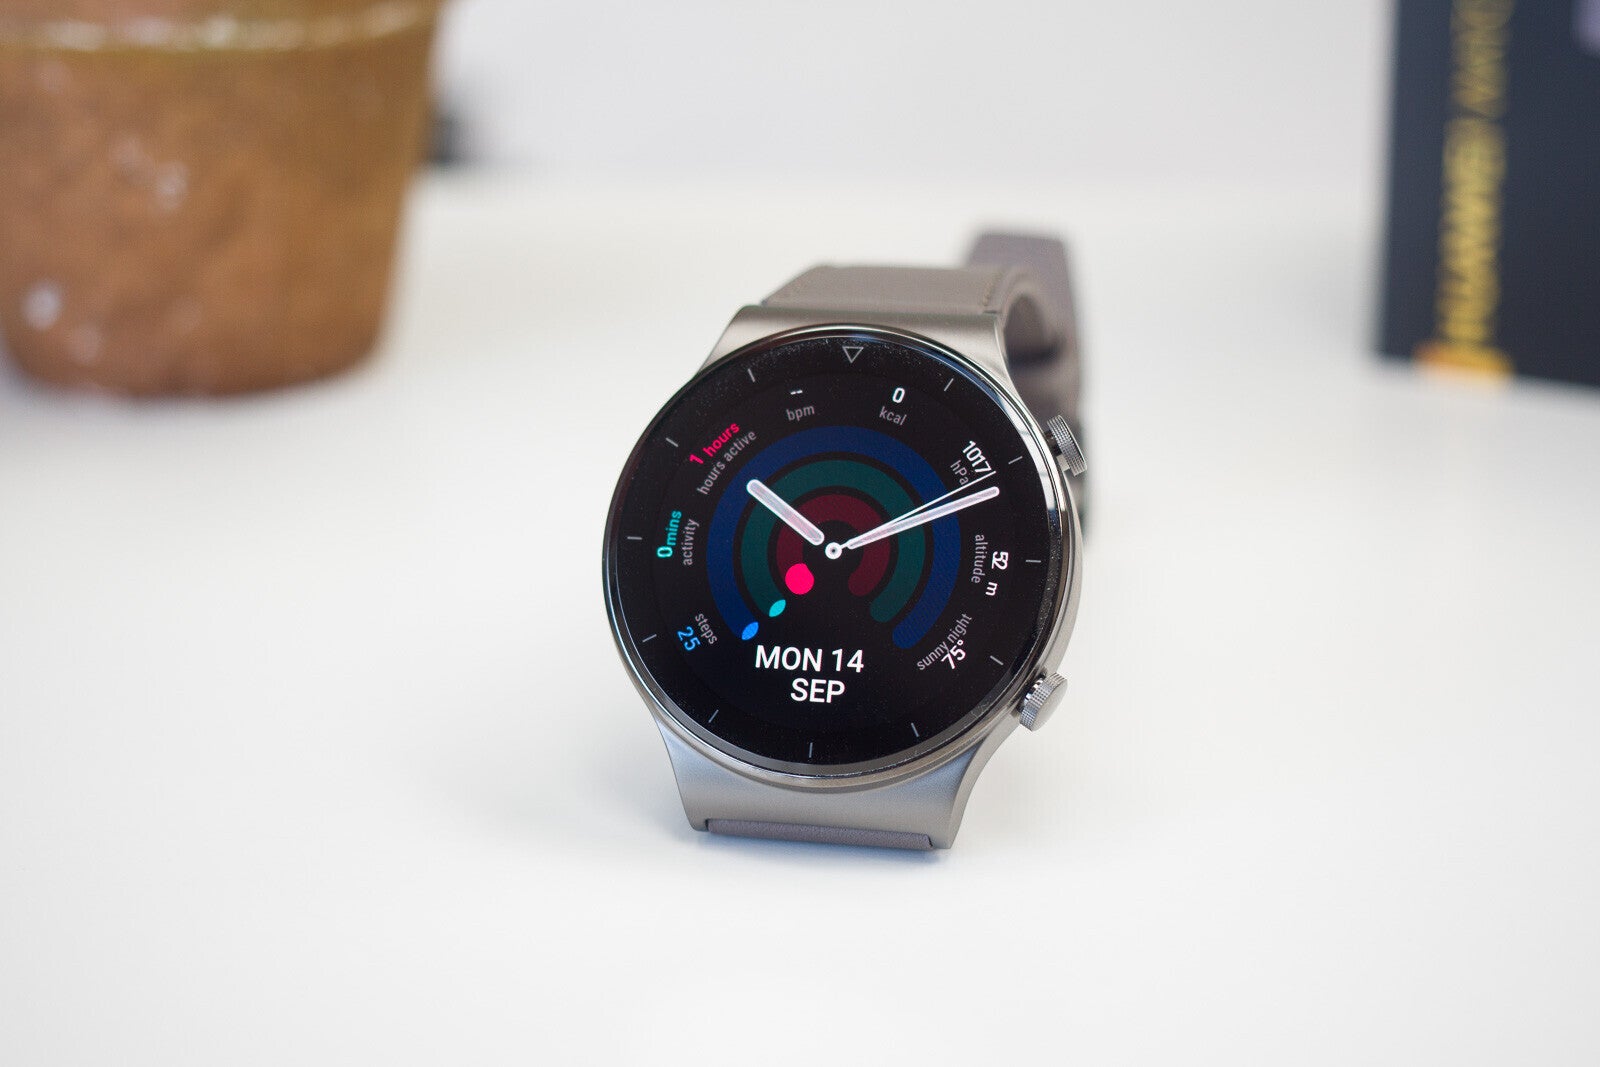 Huawei Watch GT 2 Pro - The Apple Watch and Galaxy Watch 3 were very popular last quarter